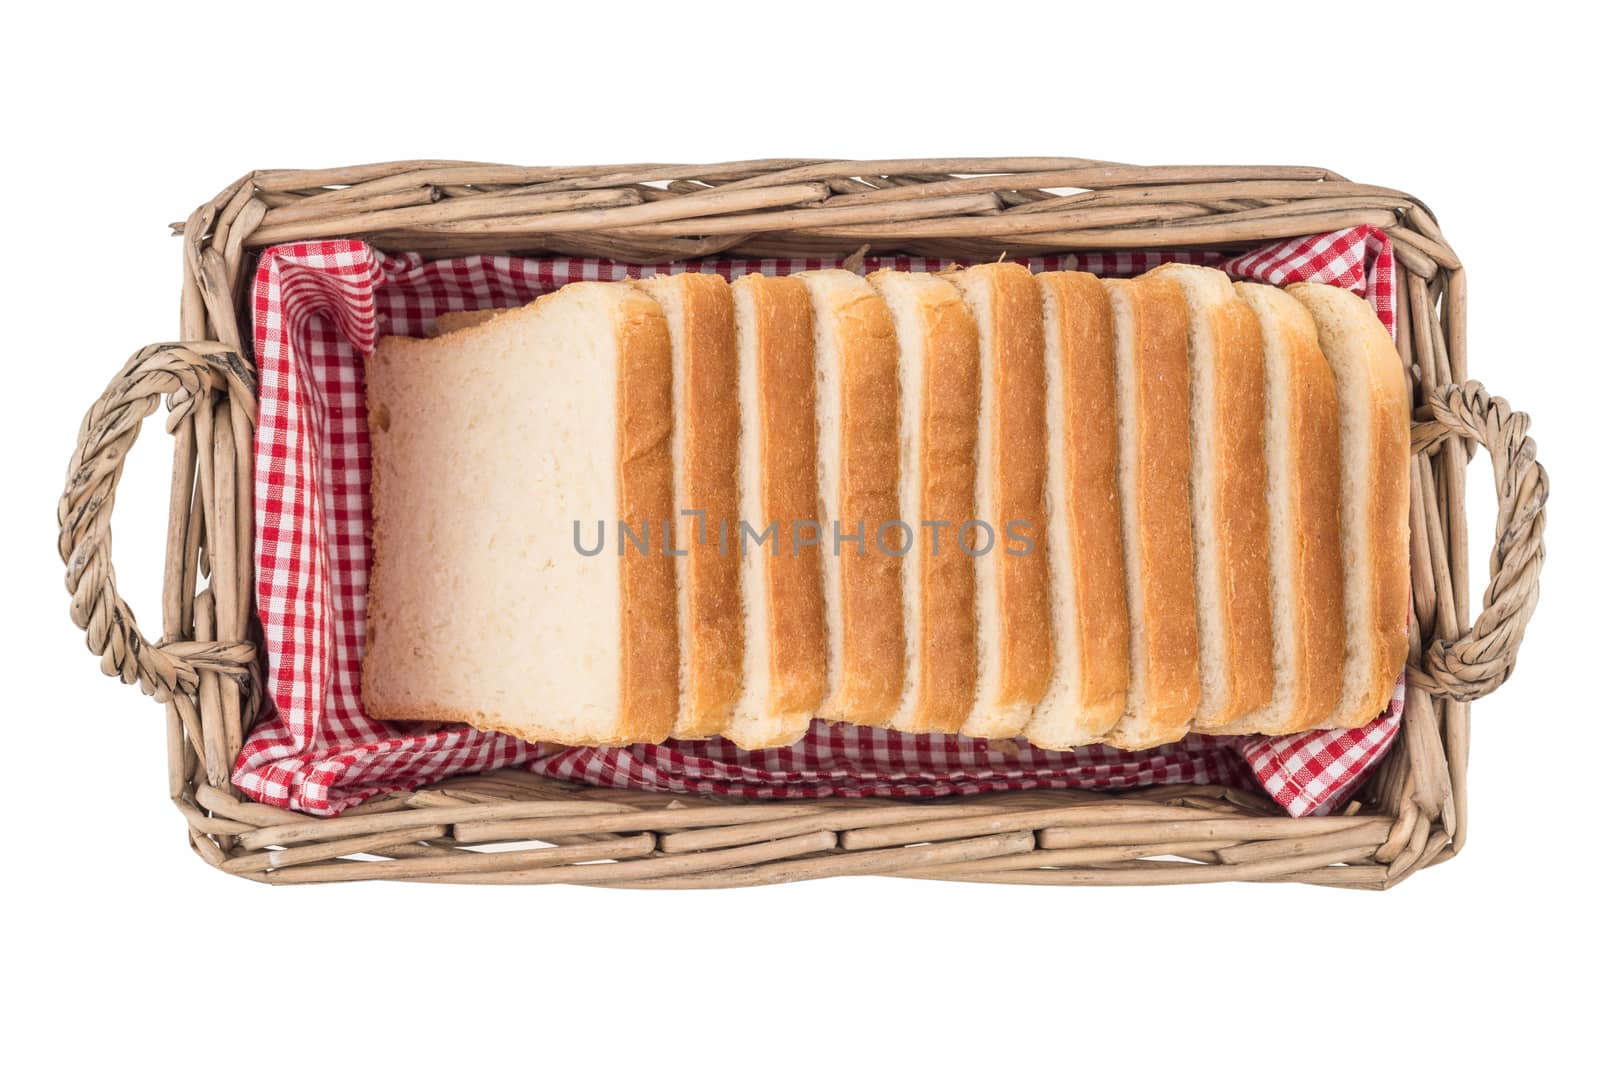 White bread in basket. Slice. Isolated on white background. Top view.